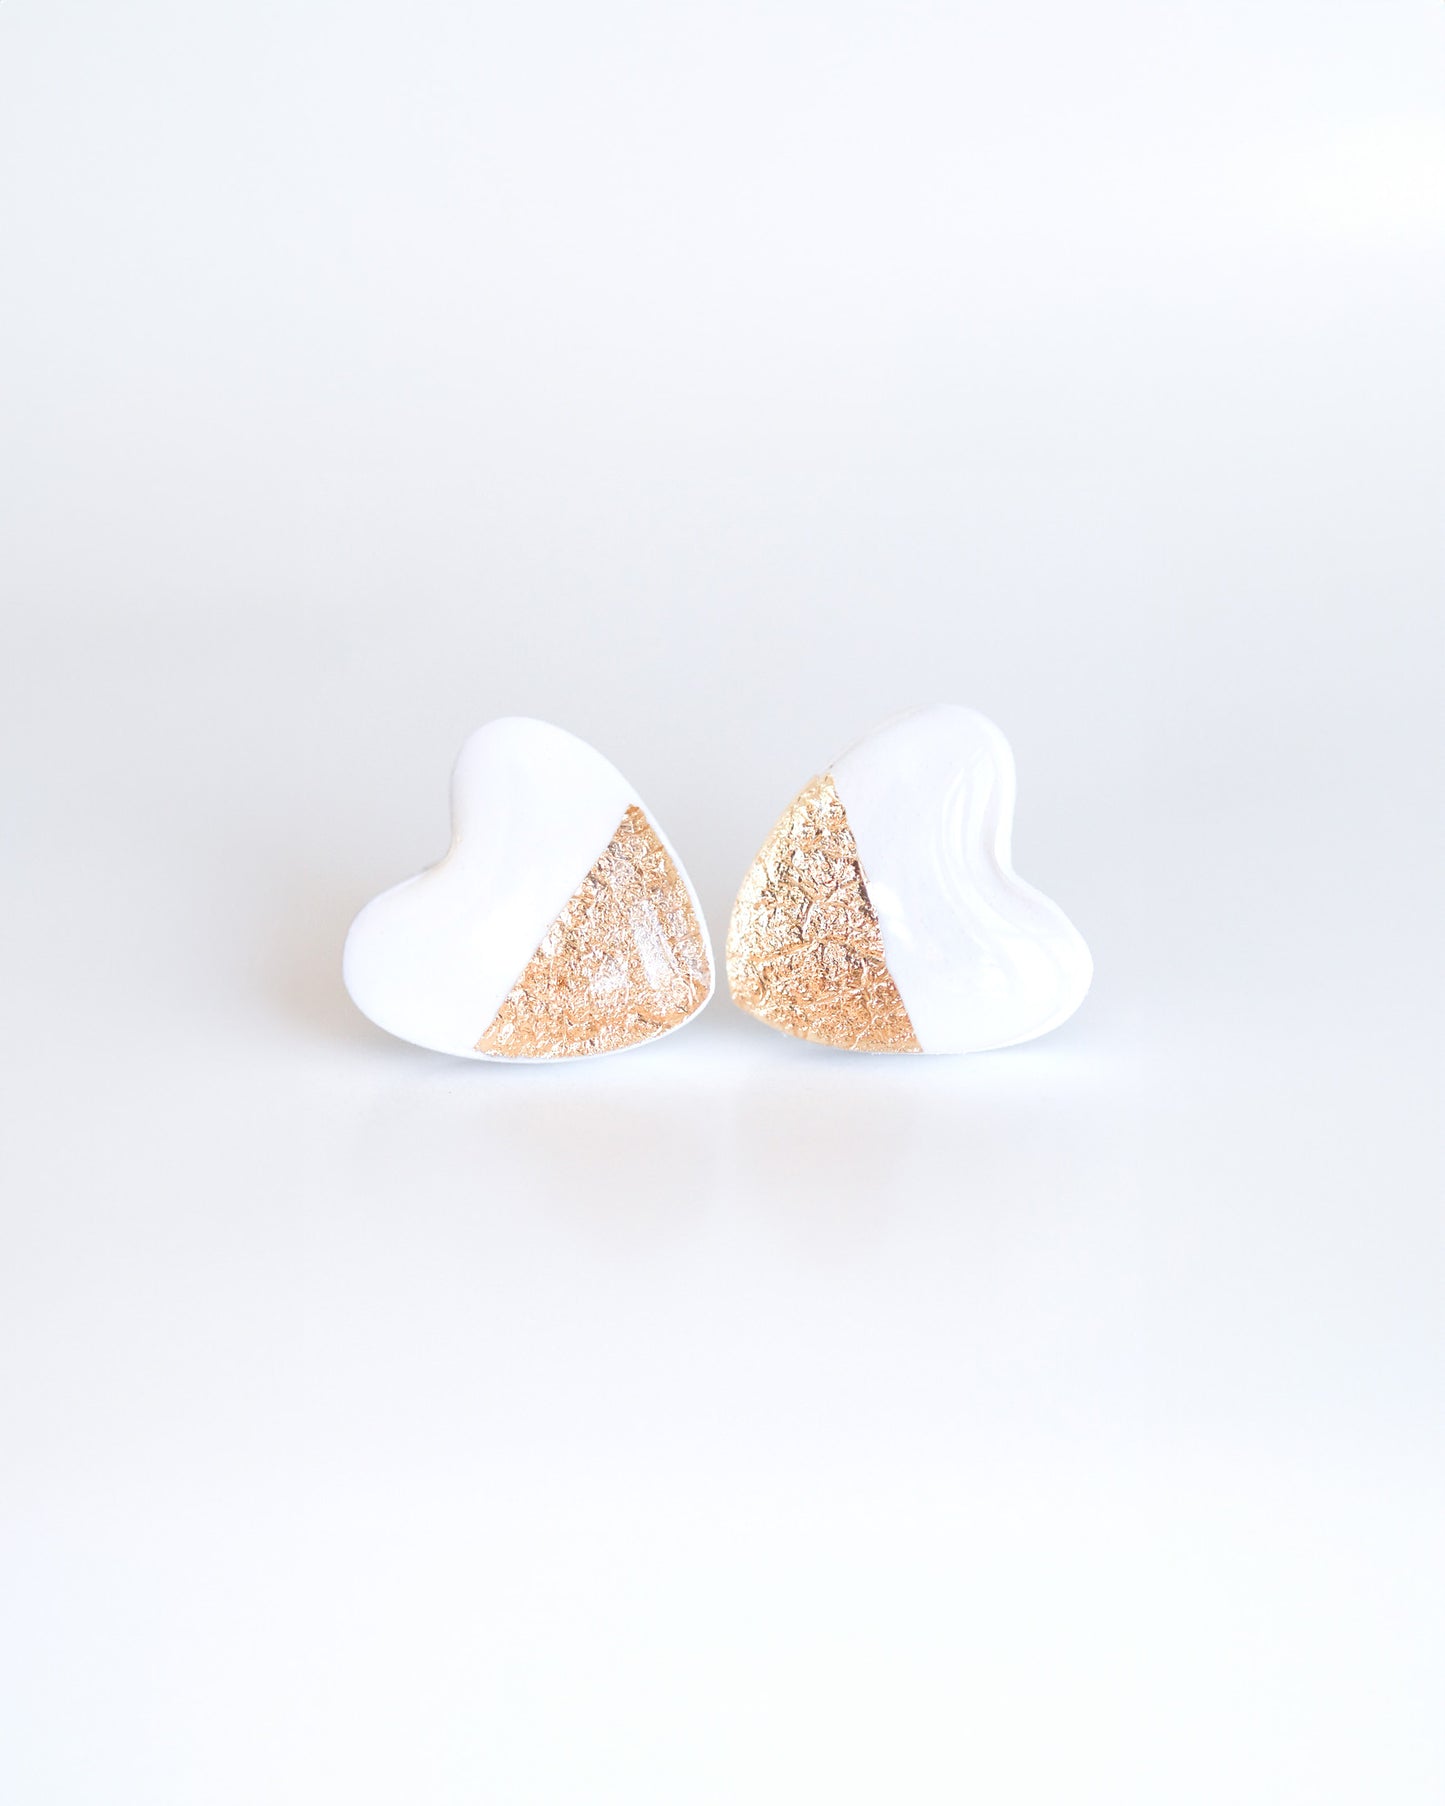 White heart stud earrings with gold foil